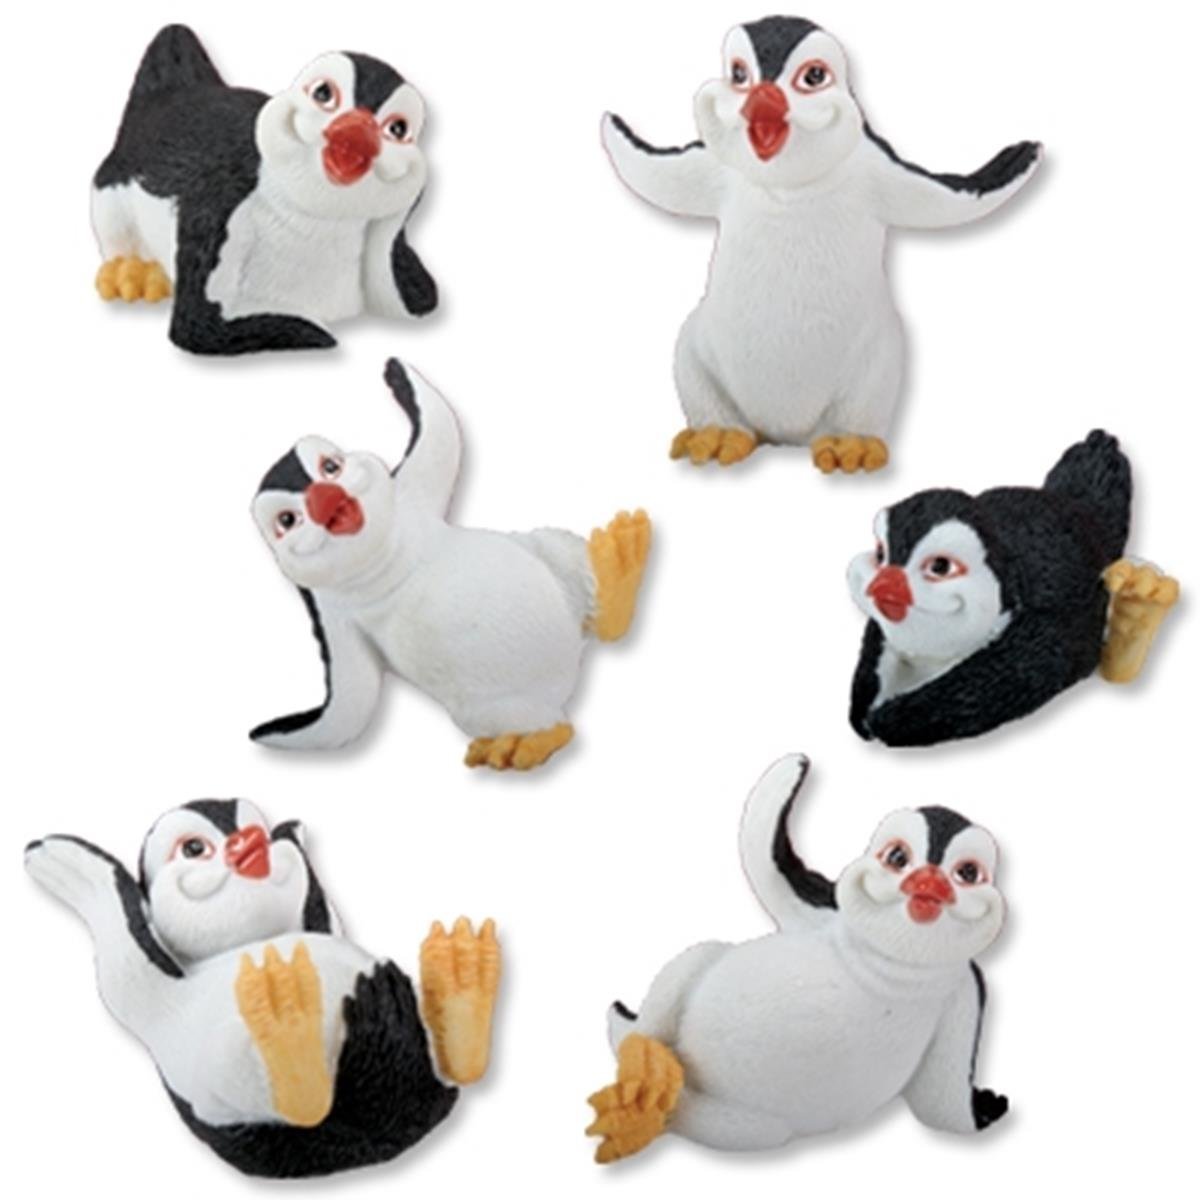 Penguins Collectible Figurine, Set of 6